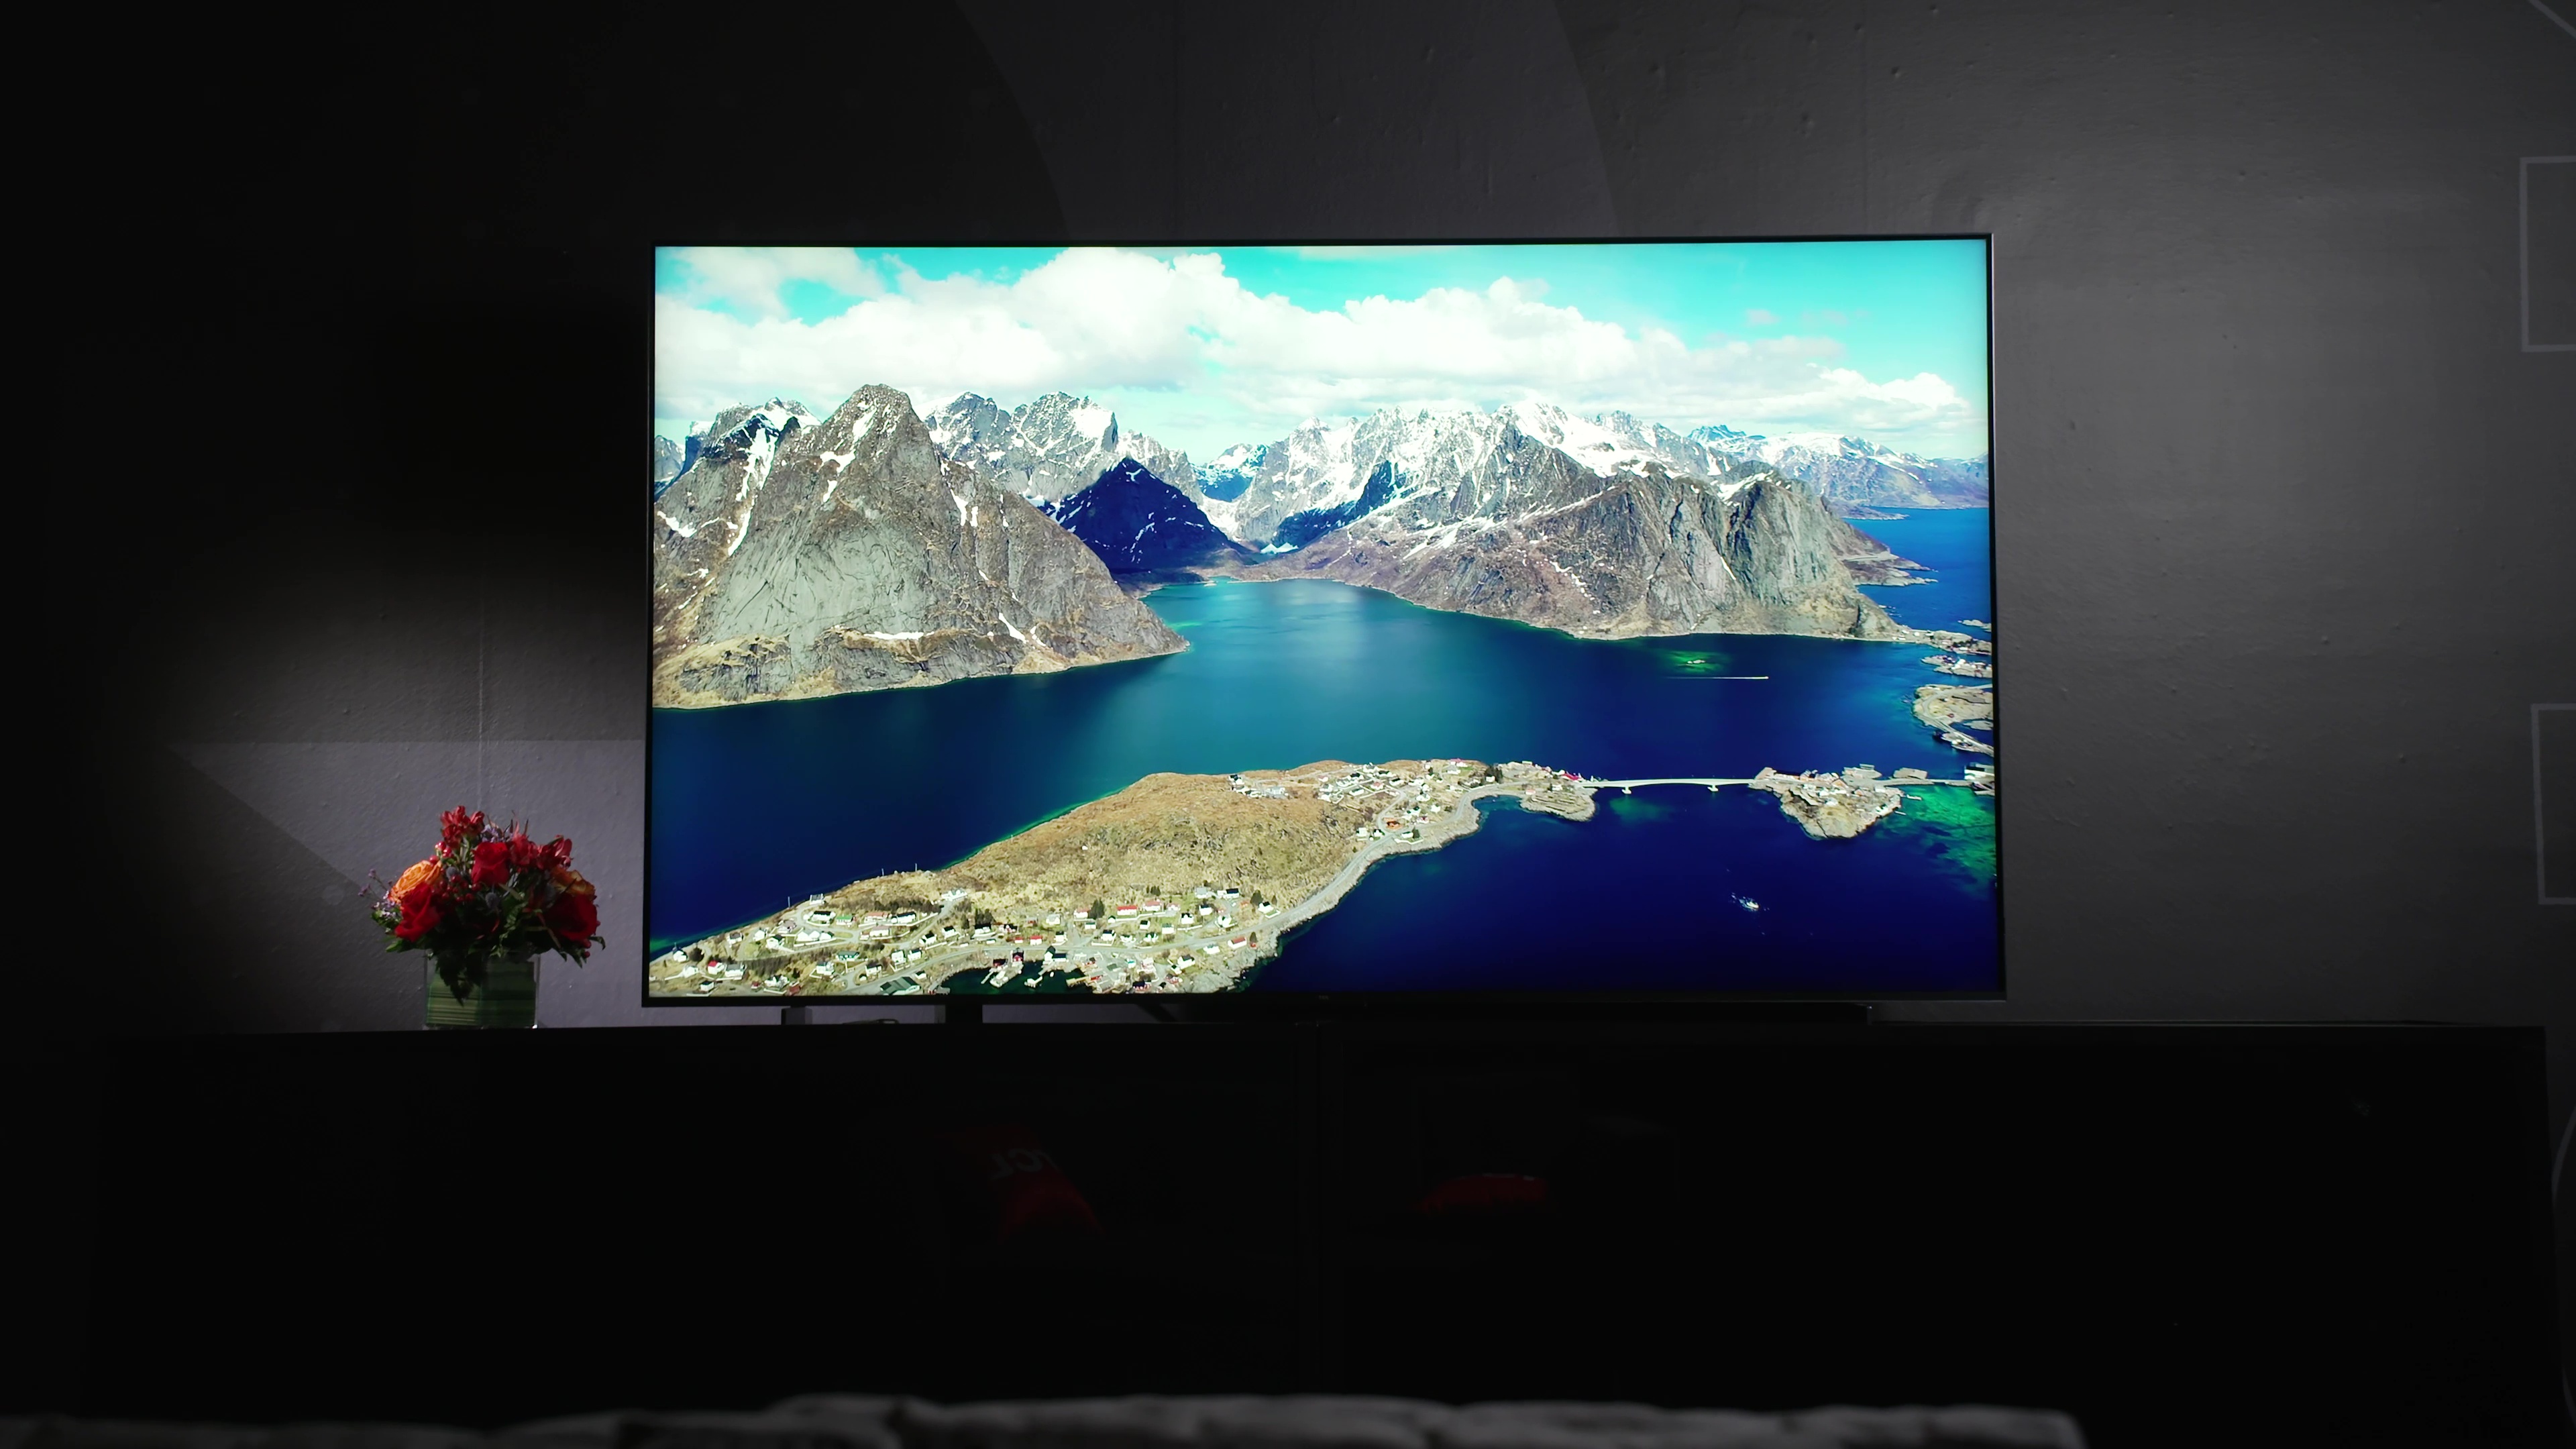 Big 75-inch TCL QM8 4K Mini-LED TV with 120Hz and 2,000 nits on sale for  its lowest price ever -  News